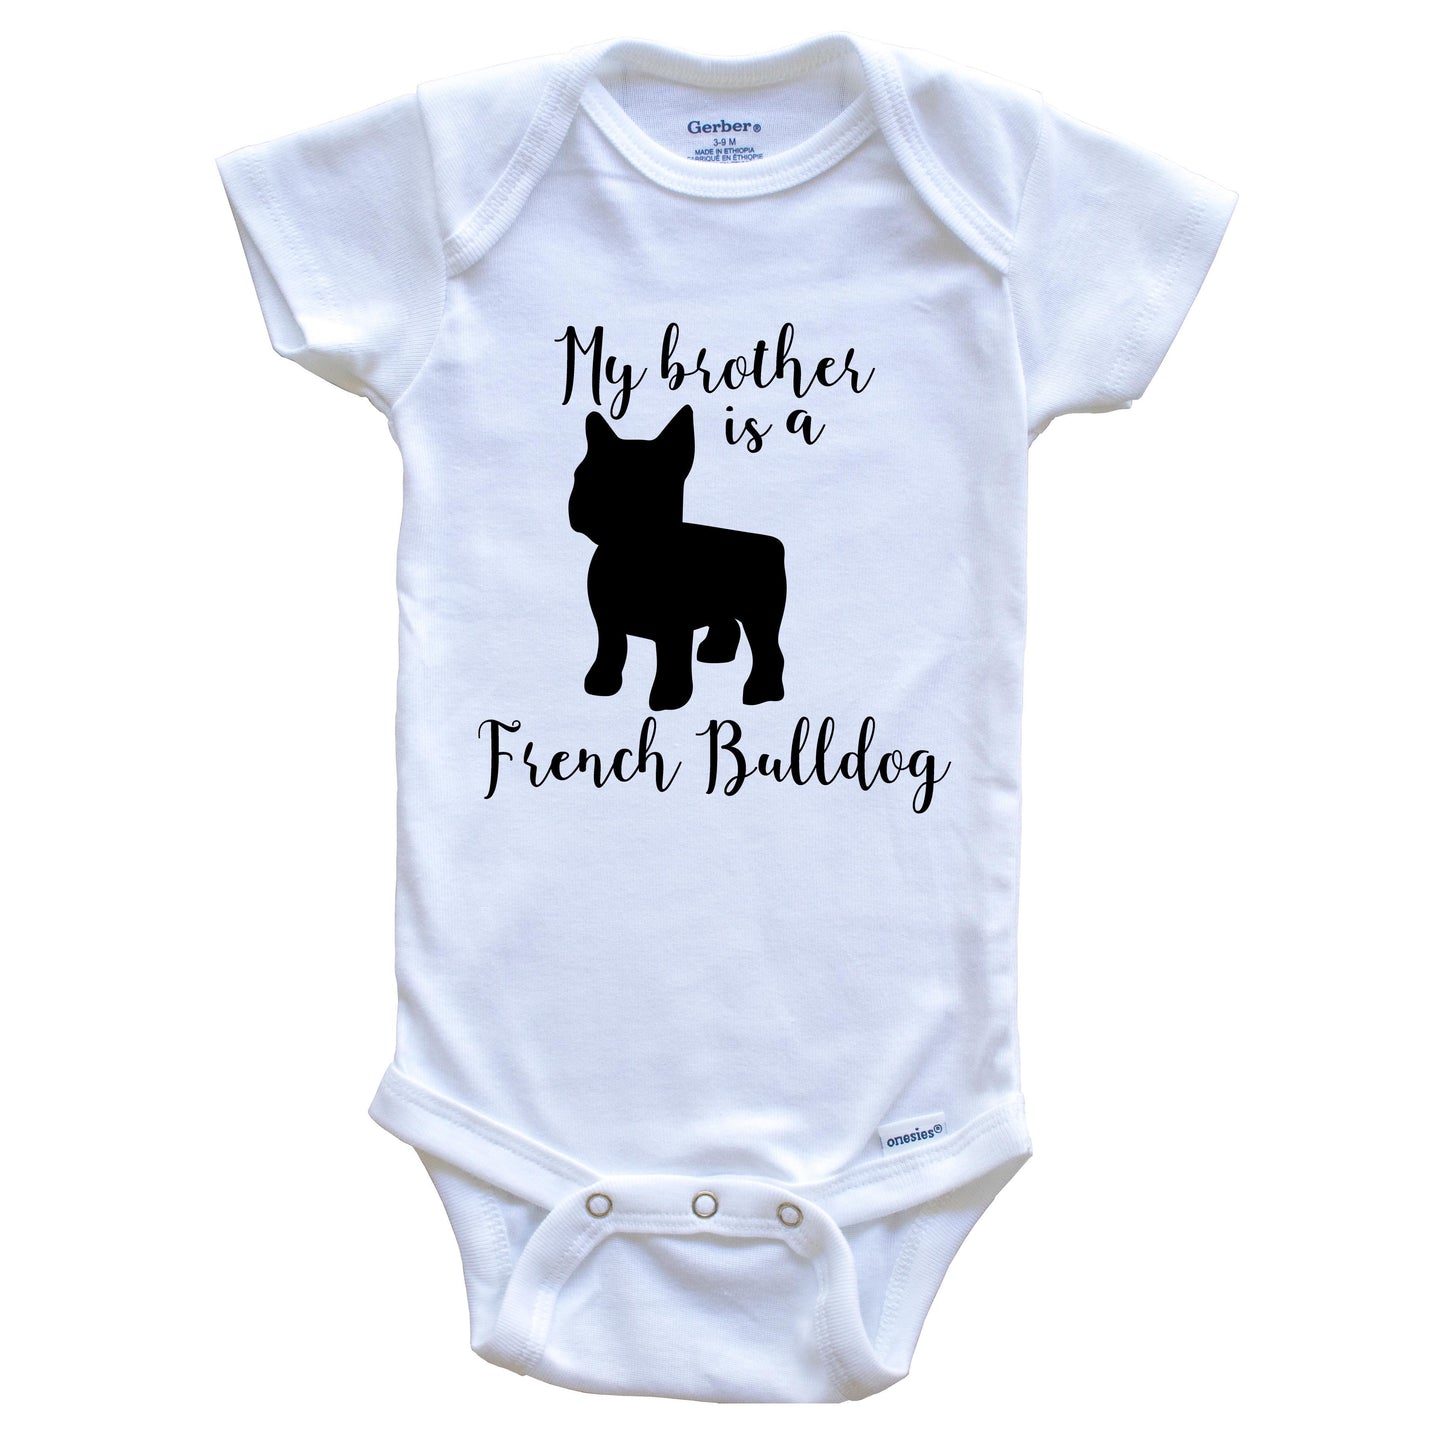 My Brother Is A French Bulldog Cute Dog Baby Onesie - Frenchie One Piece Baby Bodysuit